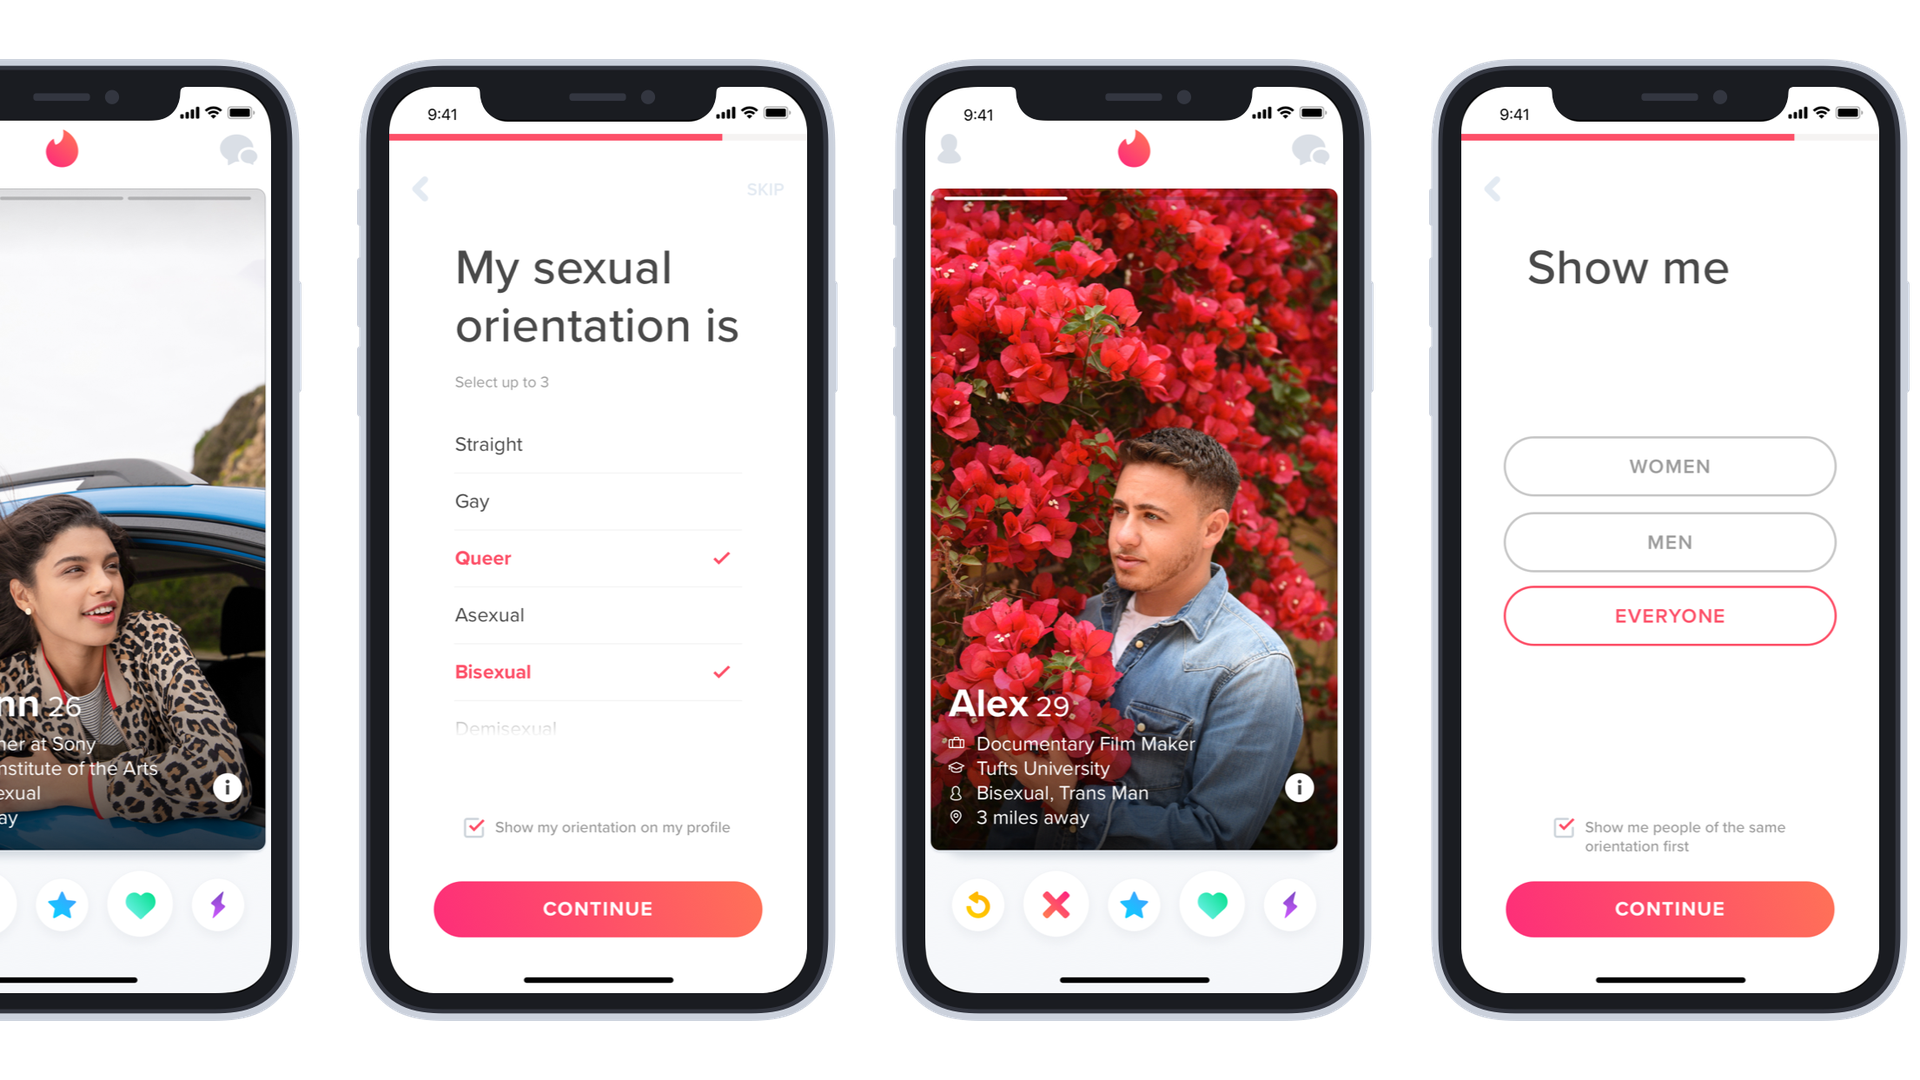 The new sexual orientation options offered in the Tinder app